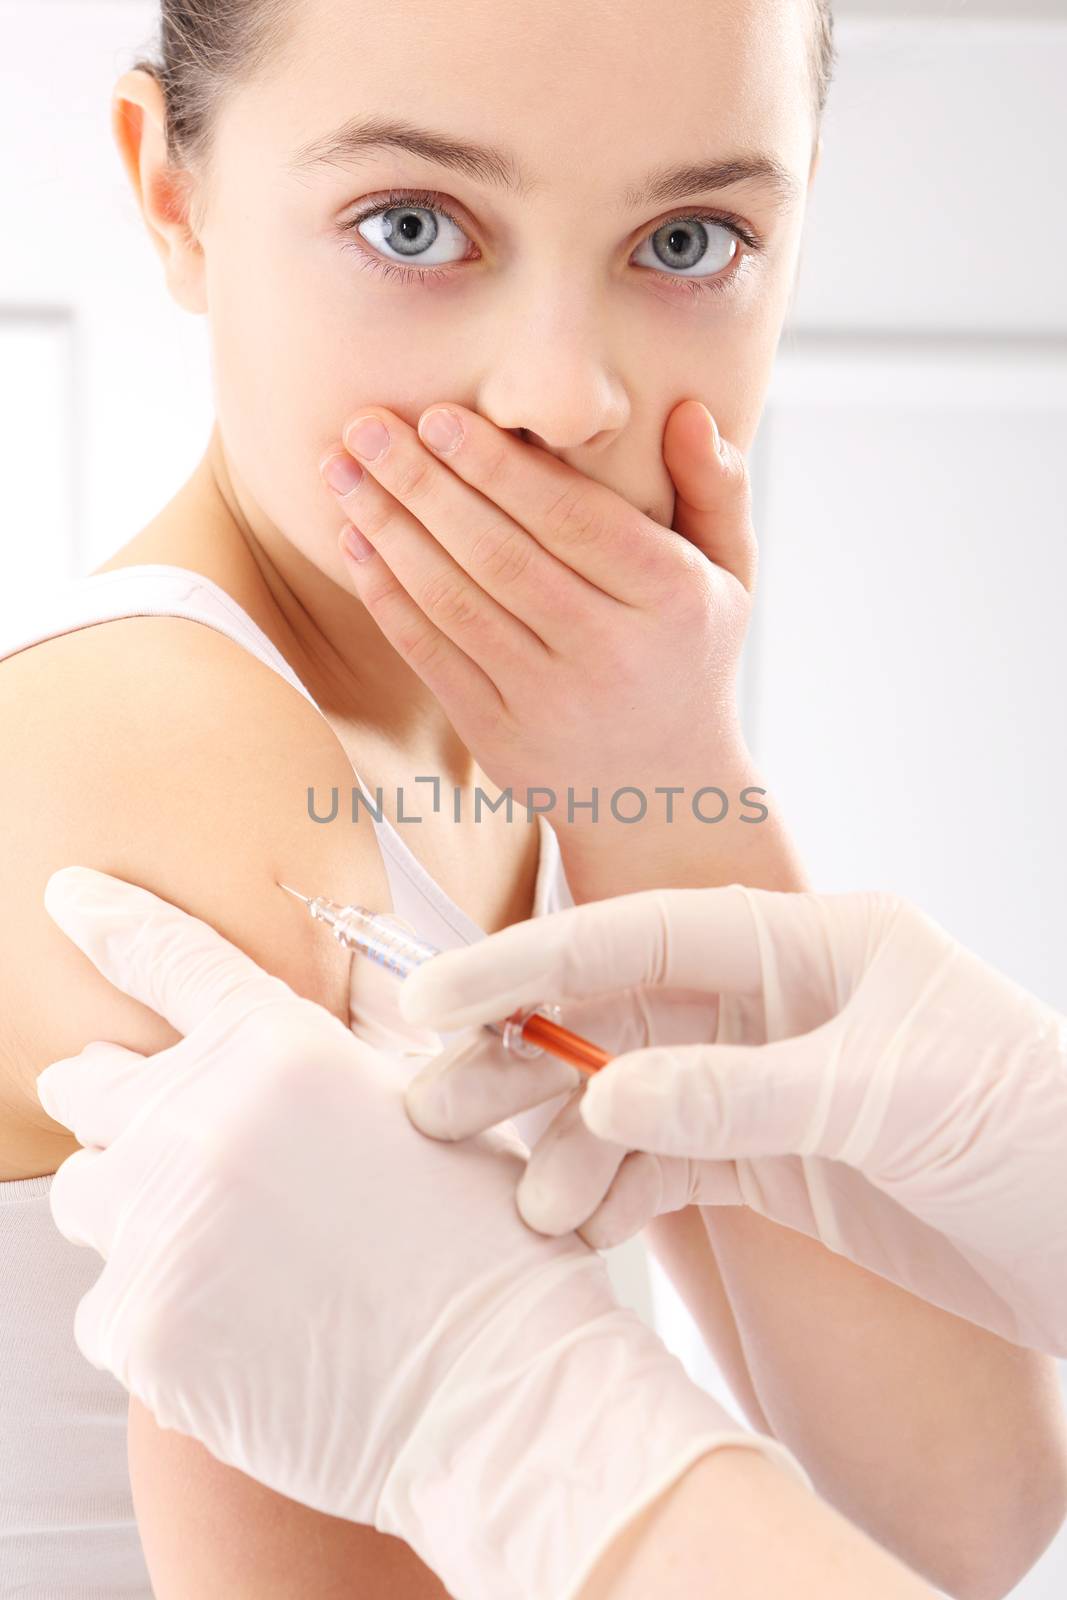 Frightened child vaccination by robert_przybysz